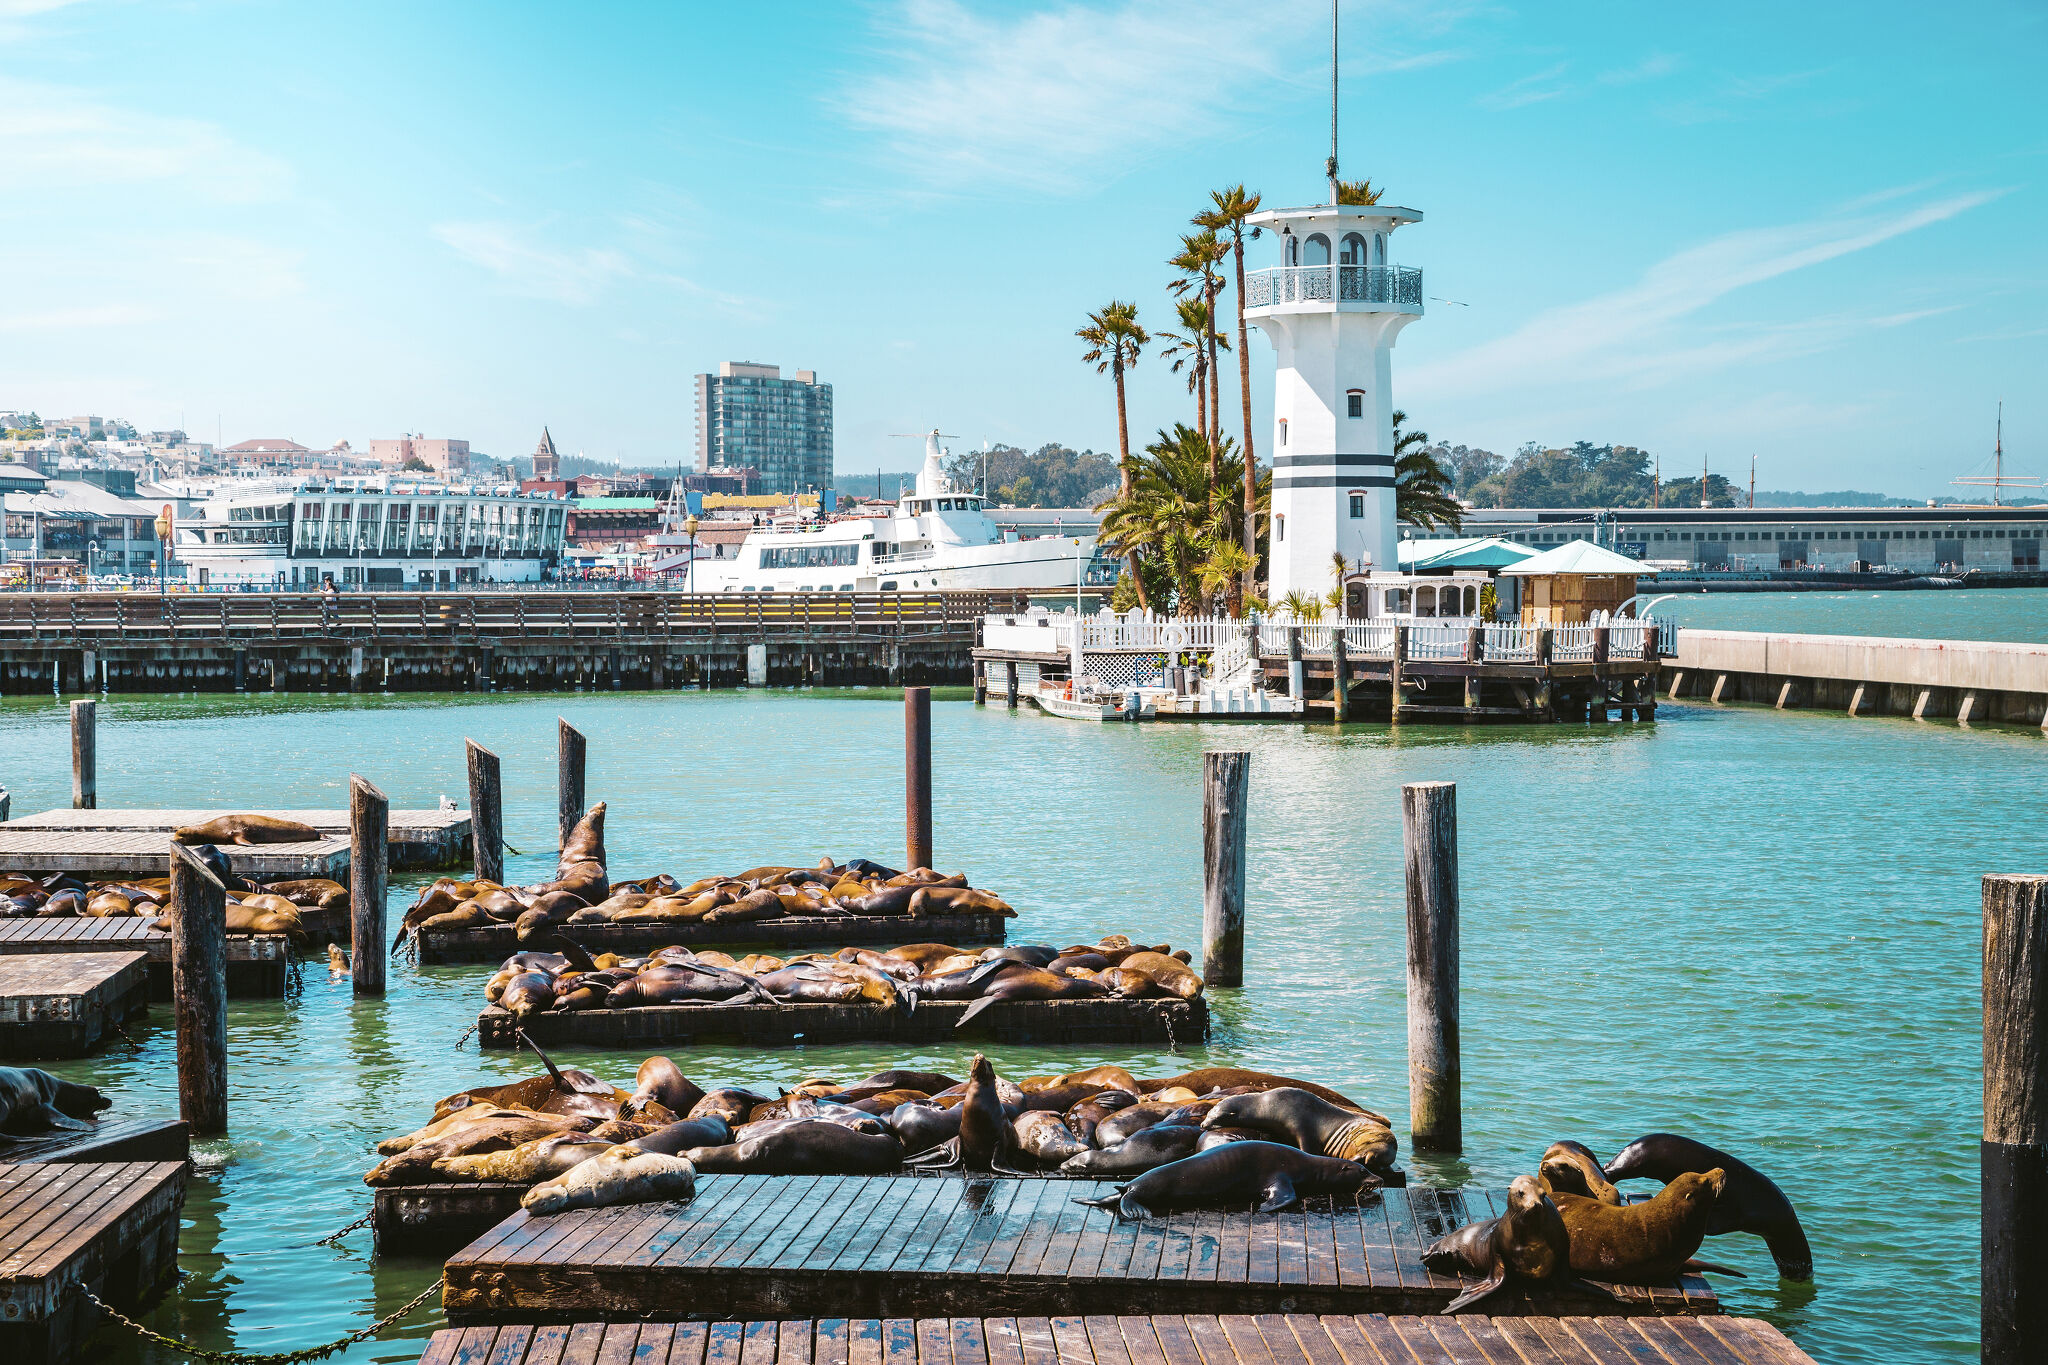 San Francisco's Pier 39 sea lions: Why they hang out here